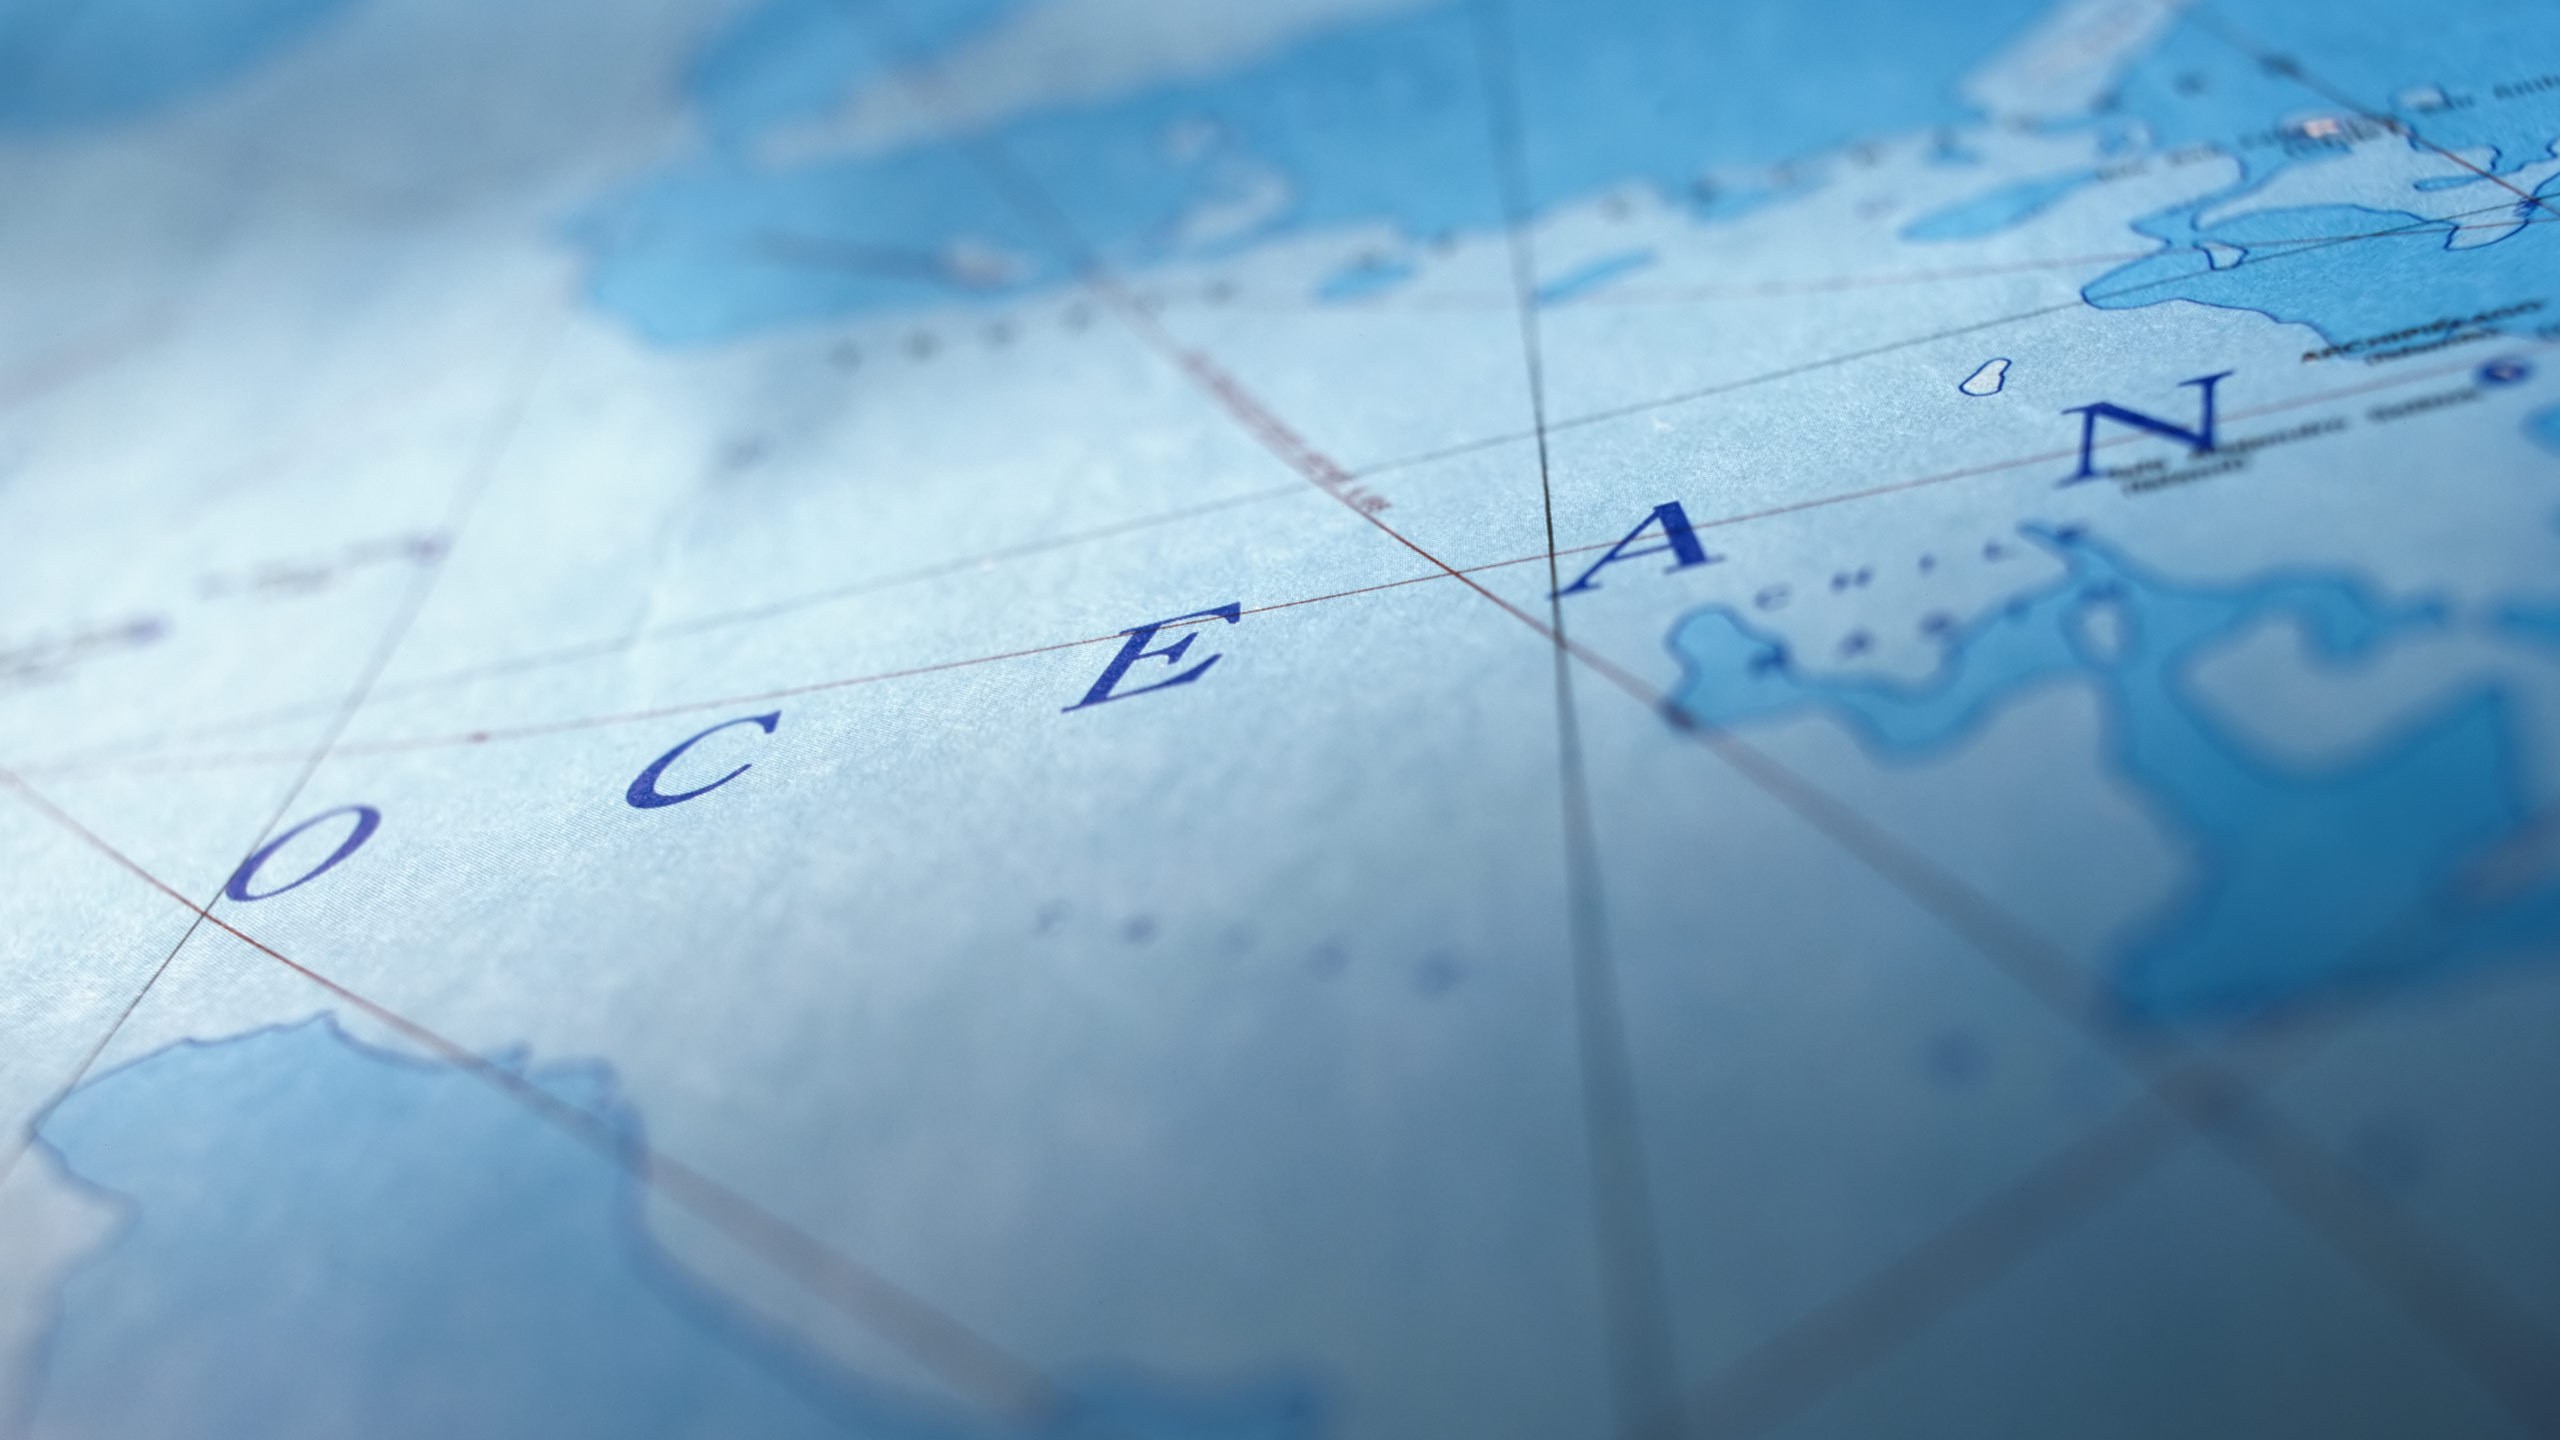 General 2560x1440 map sea continents lines depth of field text blue typography macro cyan